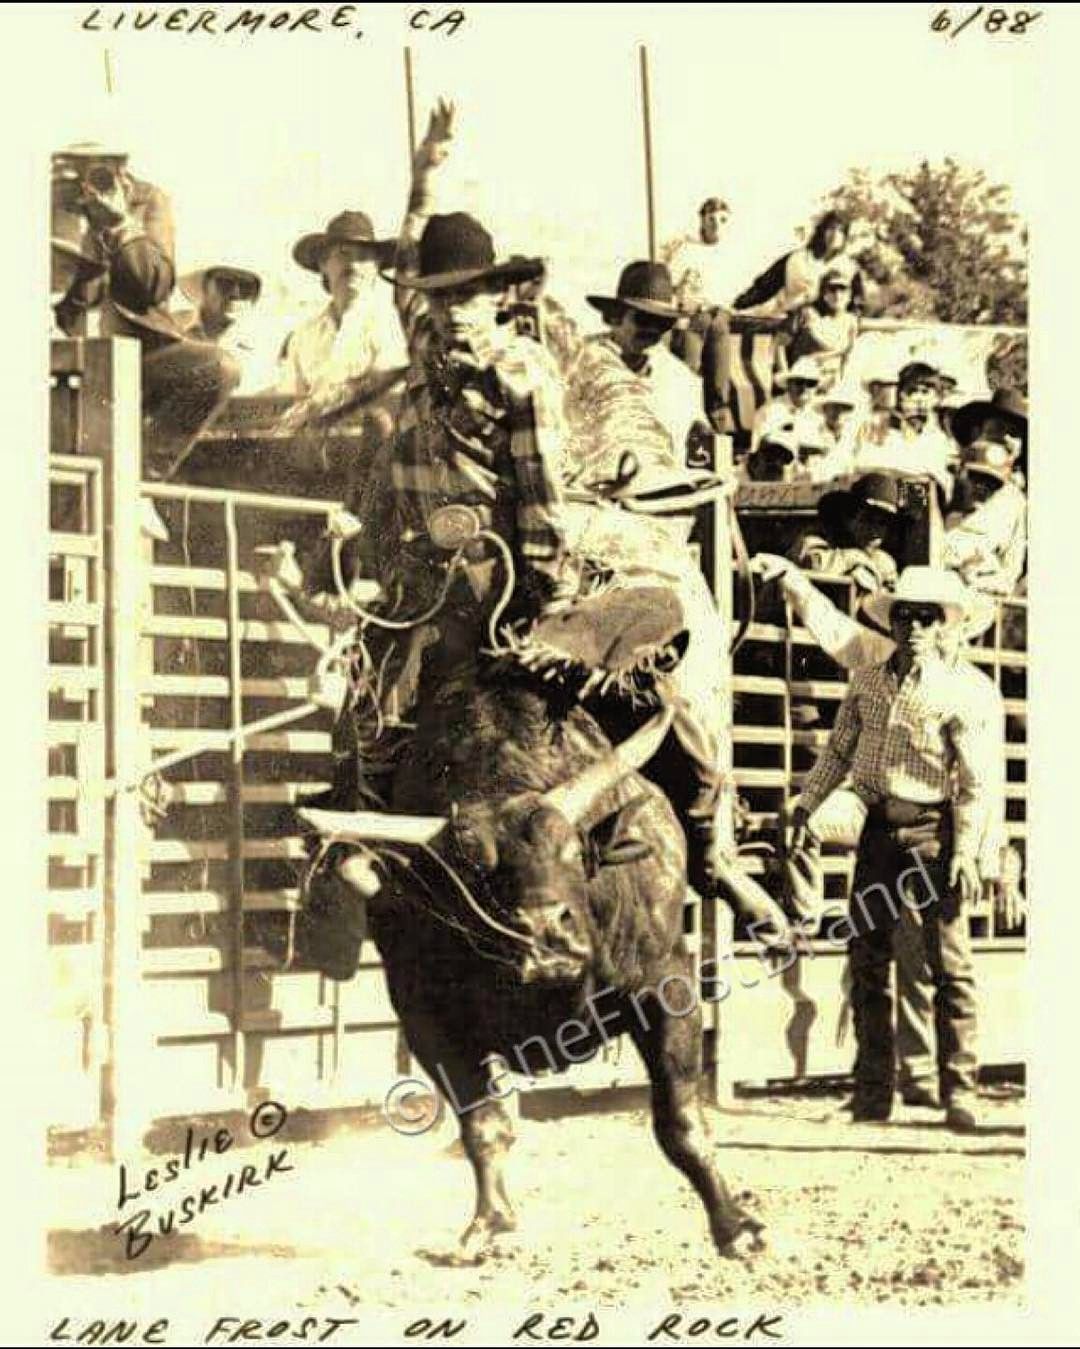 motivationmonday #lanefrost Vs #redrock at #Livermore #california back in photo by Leslie Buskirk (Instagram). Rodeo life, Lane frost, Bull riders